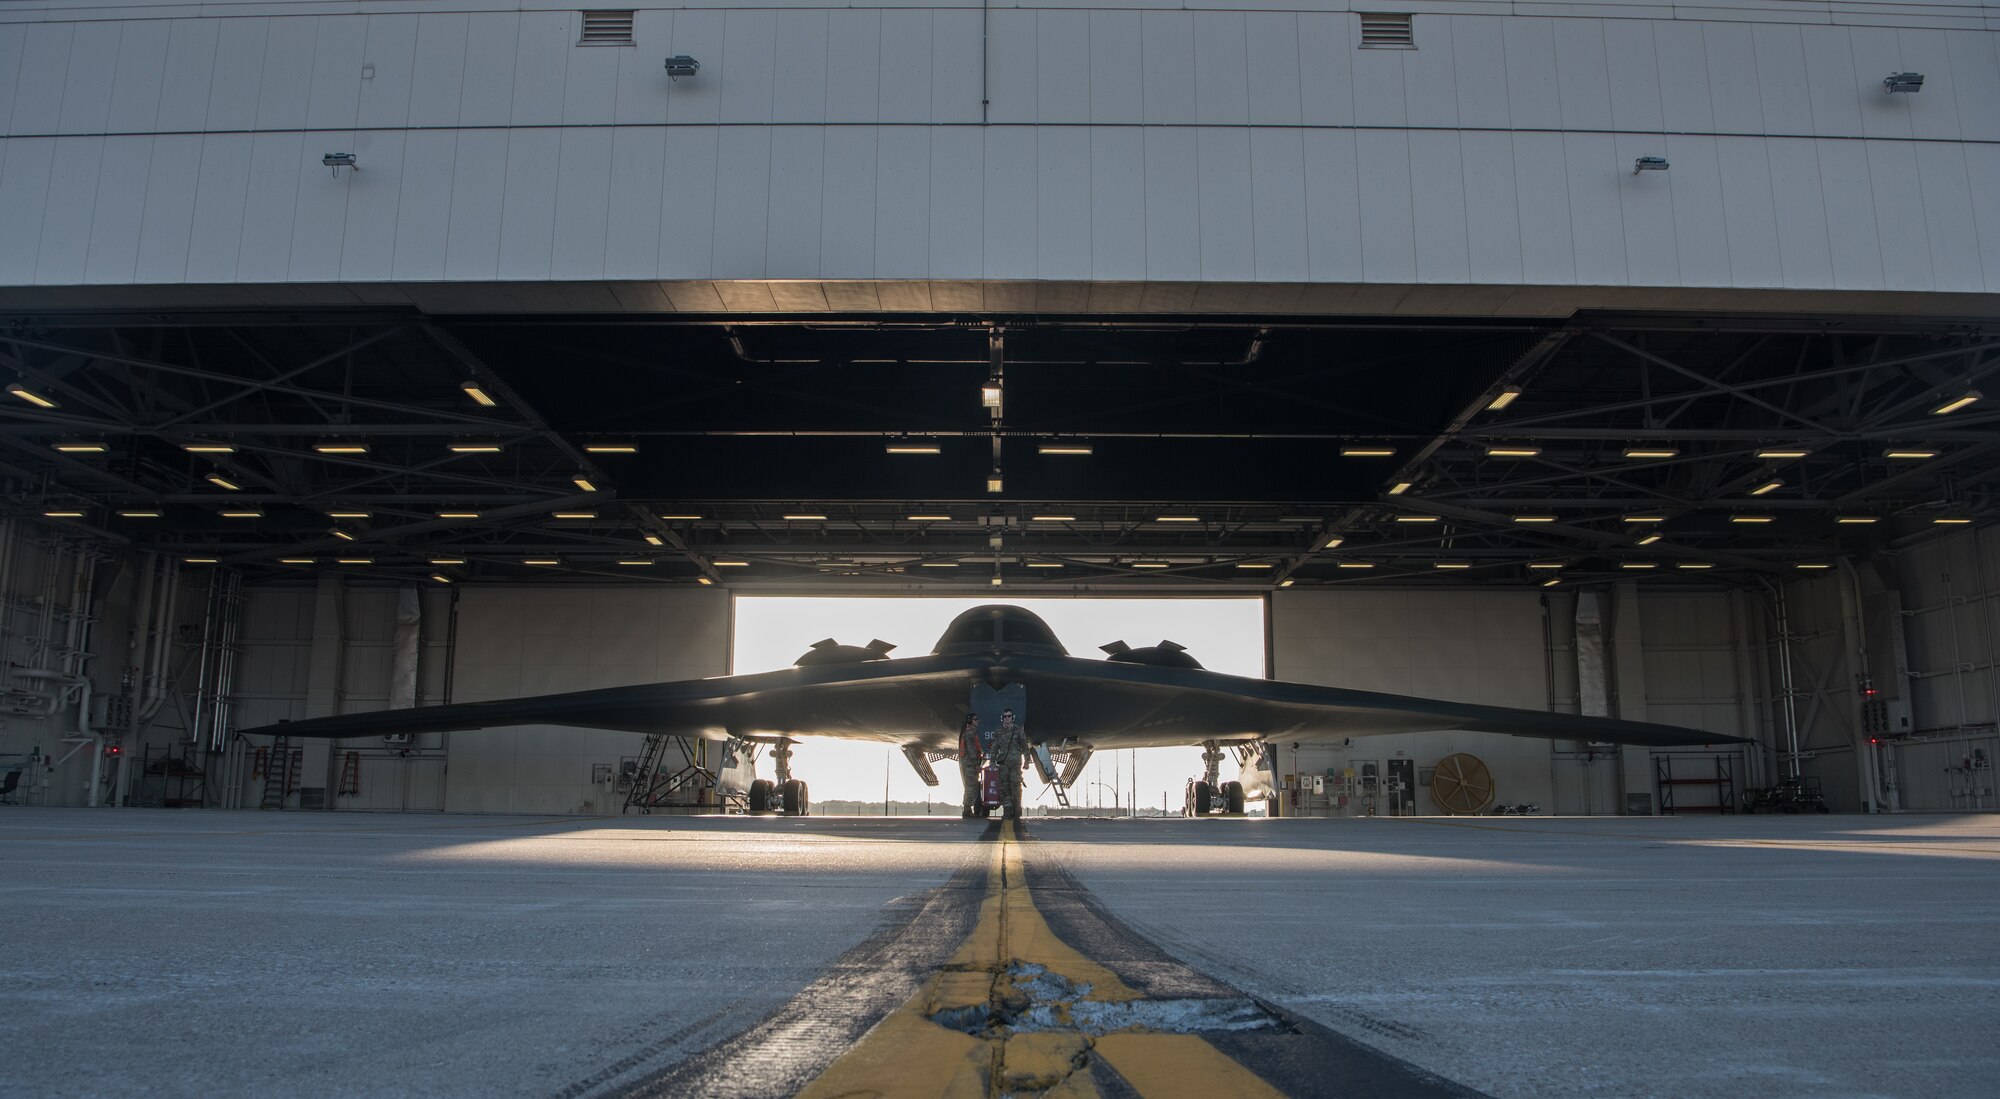 U.S. Air Force B-2 Spirit crew chiefs with the 509th Aircraft Maintenance squadron prepare a B-2 Spirit for takeoff at Whiteman Air Force Base, Missouri, Aug. 23, 2021. Thanks to its nearly 6,000-mile unrefueled range, the B-2 is capable of expediently delivering massive fire power anywhere on the globe through the most challenging enemy defenses. (U.S. Air Force photo by Senior Airman Parker J. McCauley)